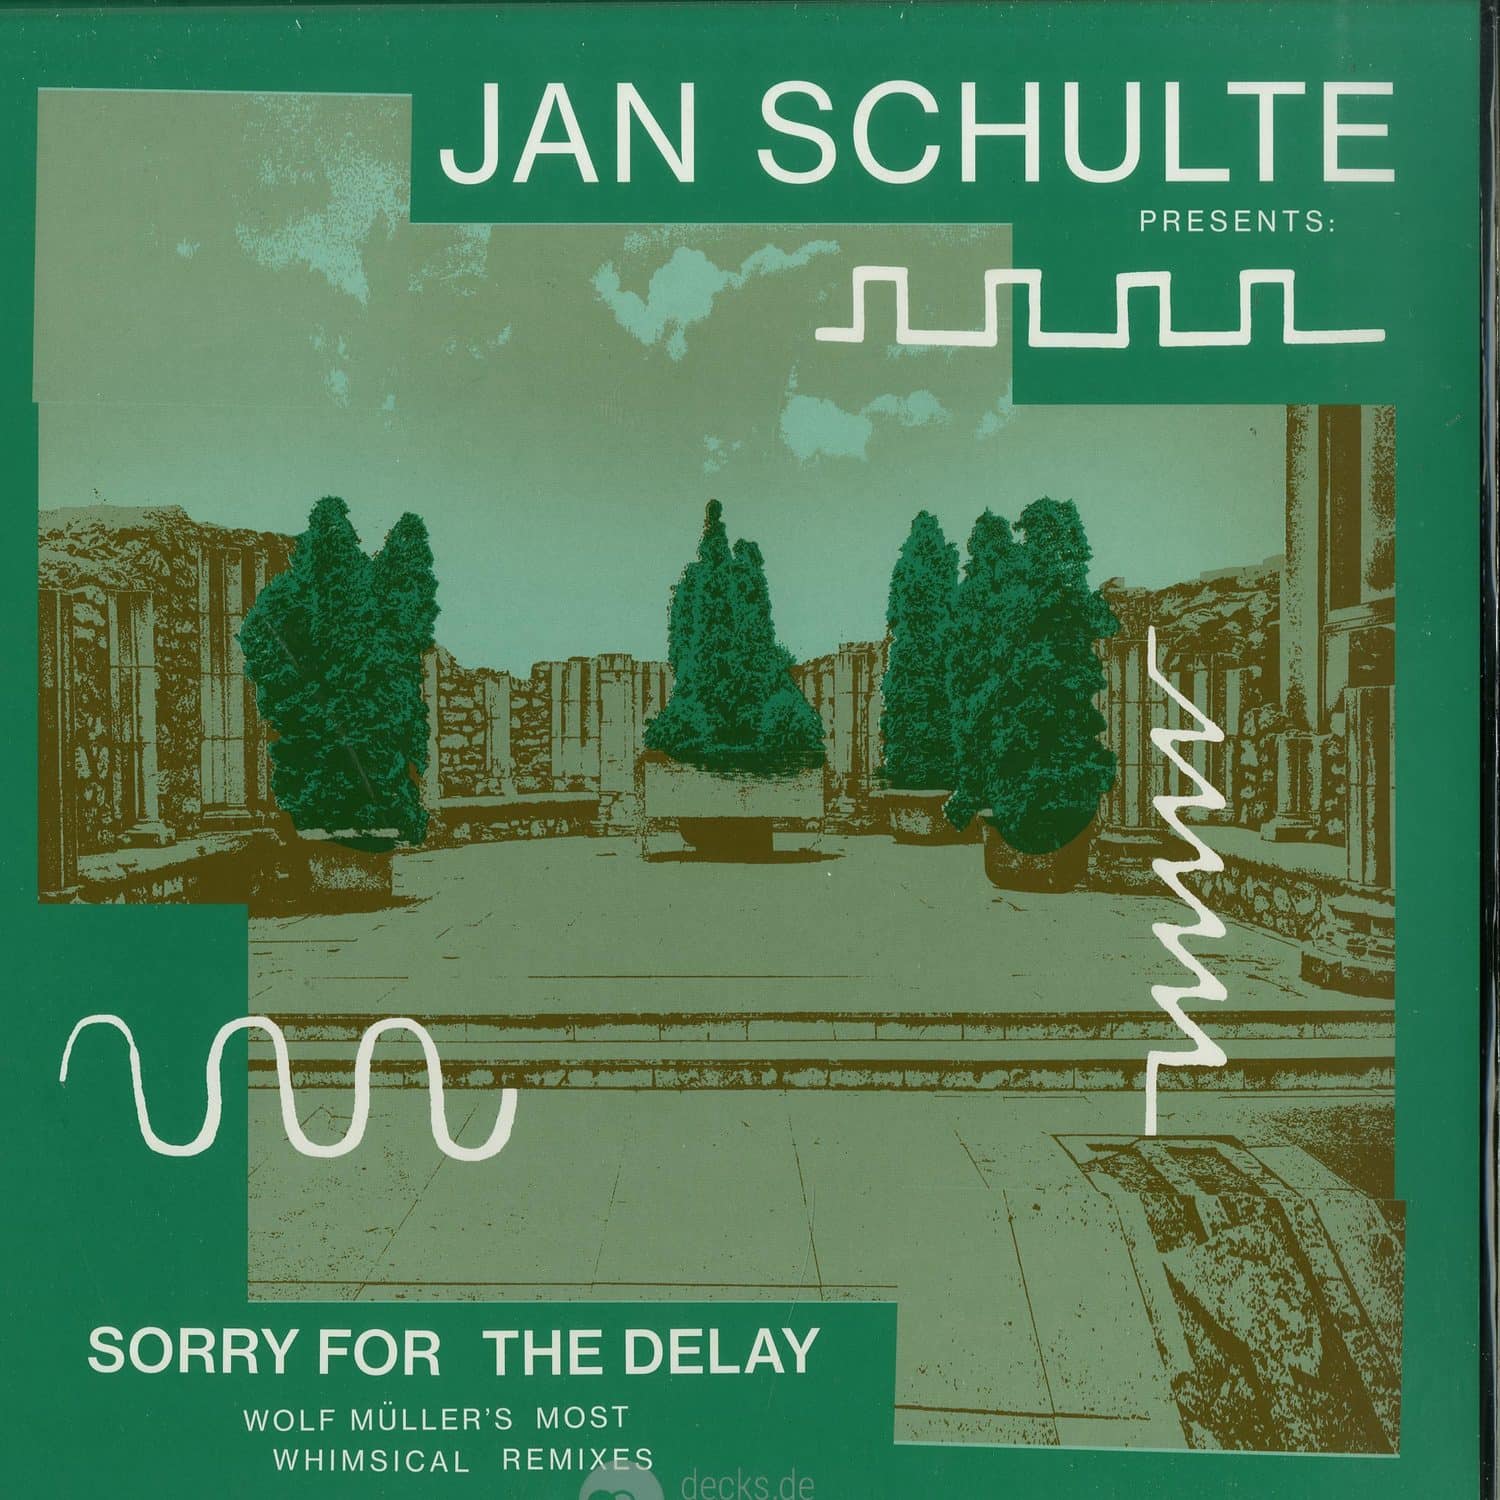 Jan Schulte - SORRY FOR THE DELAY - WOLF MLLERS MOST WHIMSICAL REMIXES 